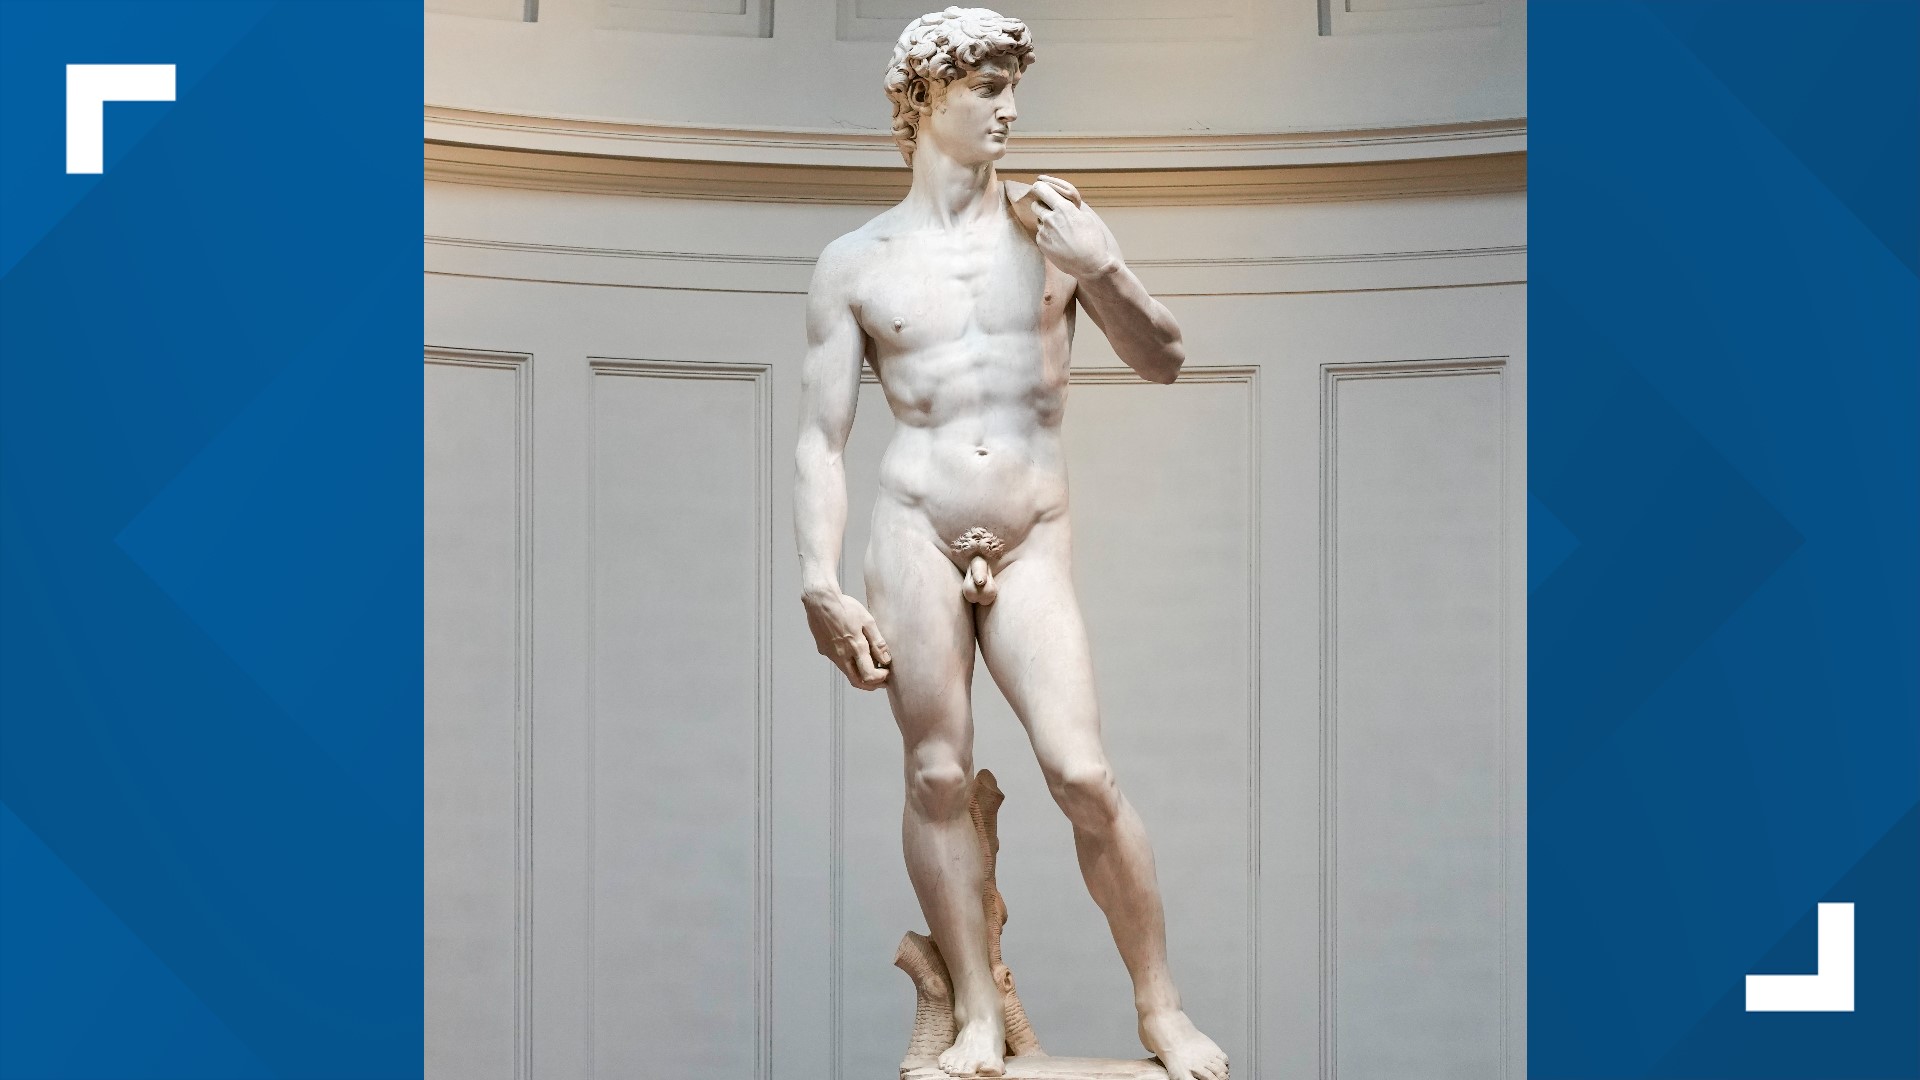 The current fight is over whether it's acceptable for memorabilia to focus on David's genitals, a much lampooned feature of the statue.